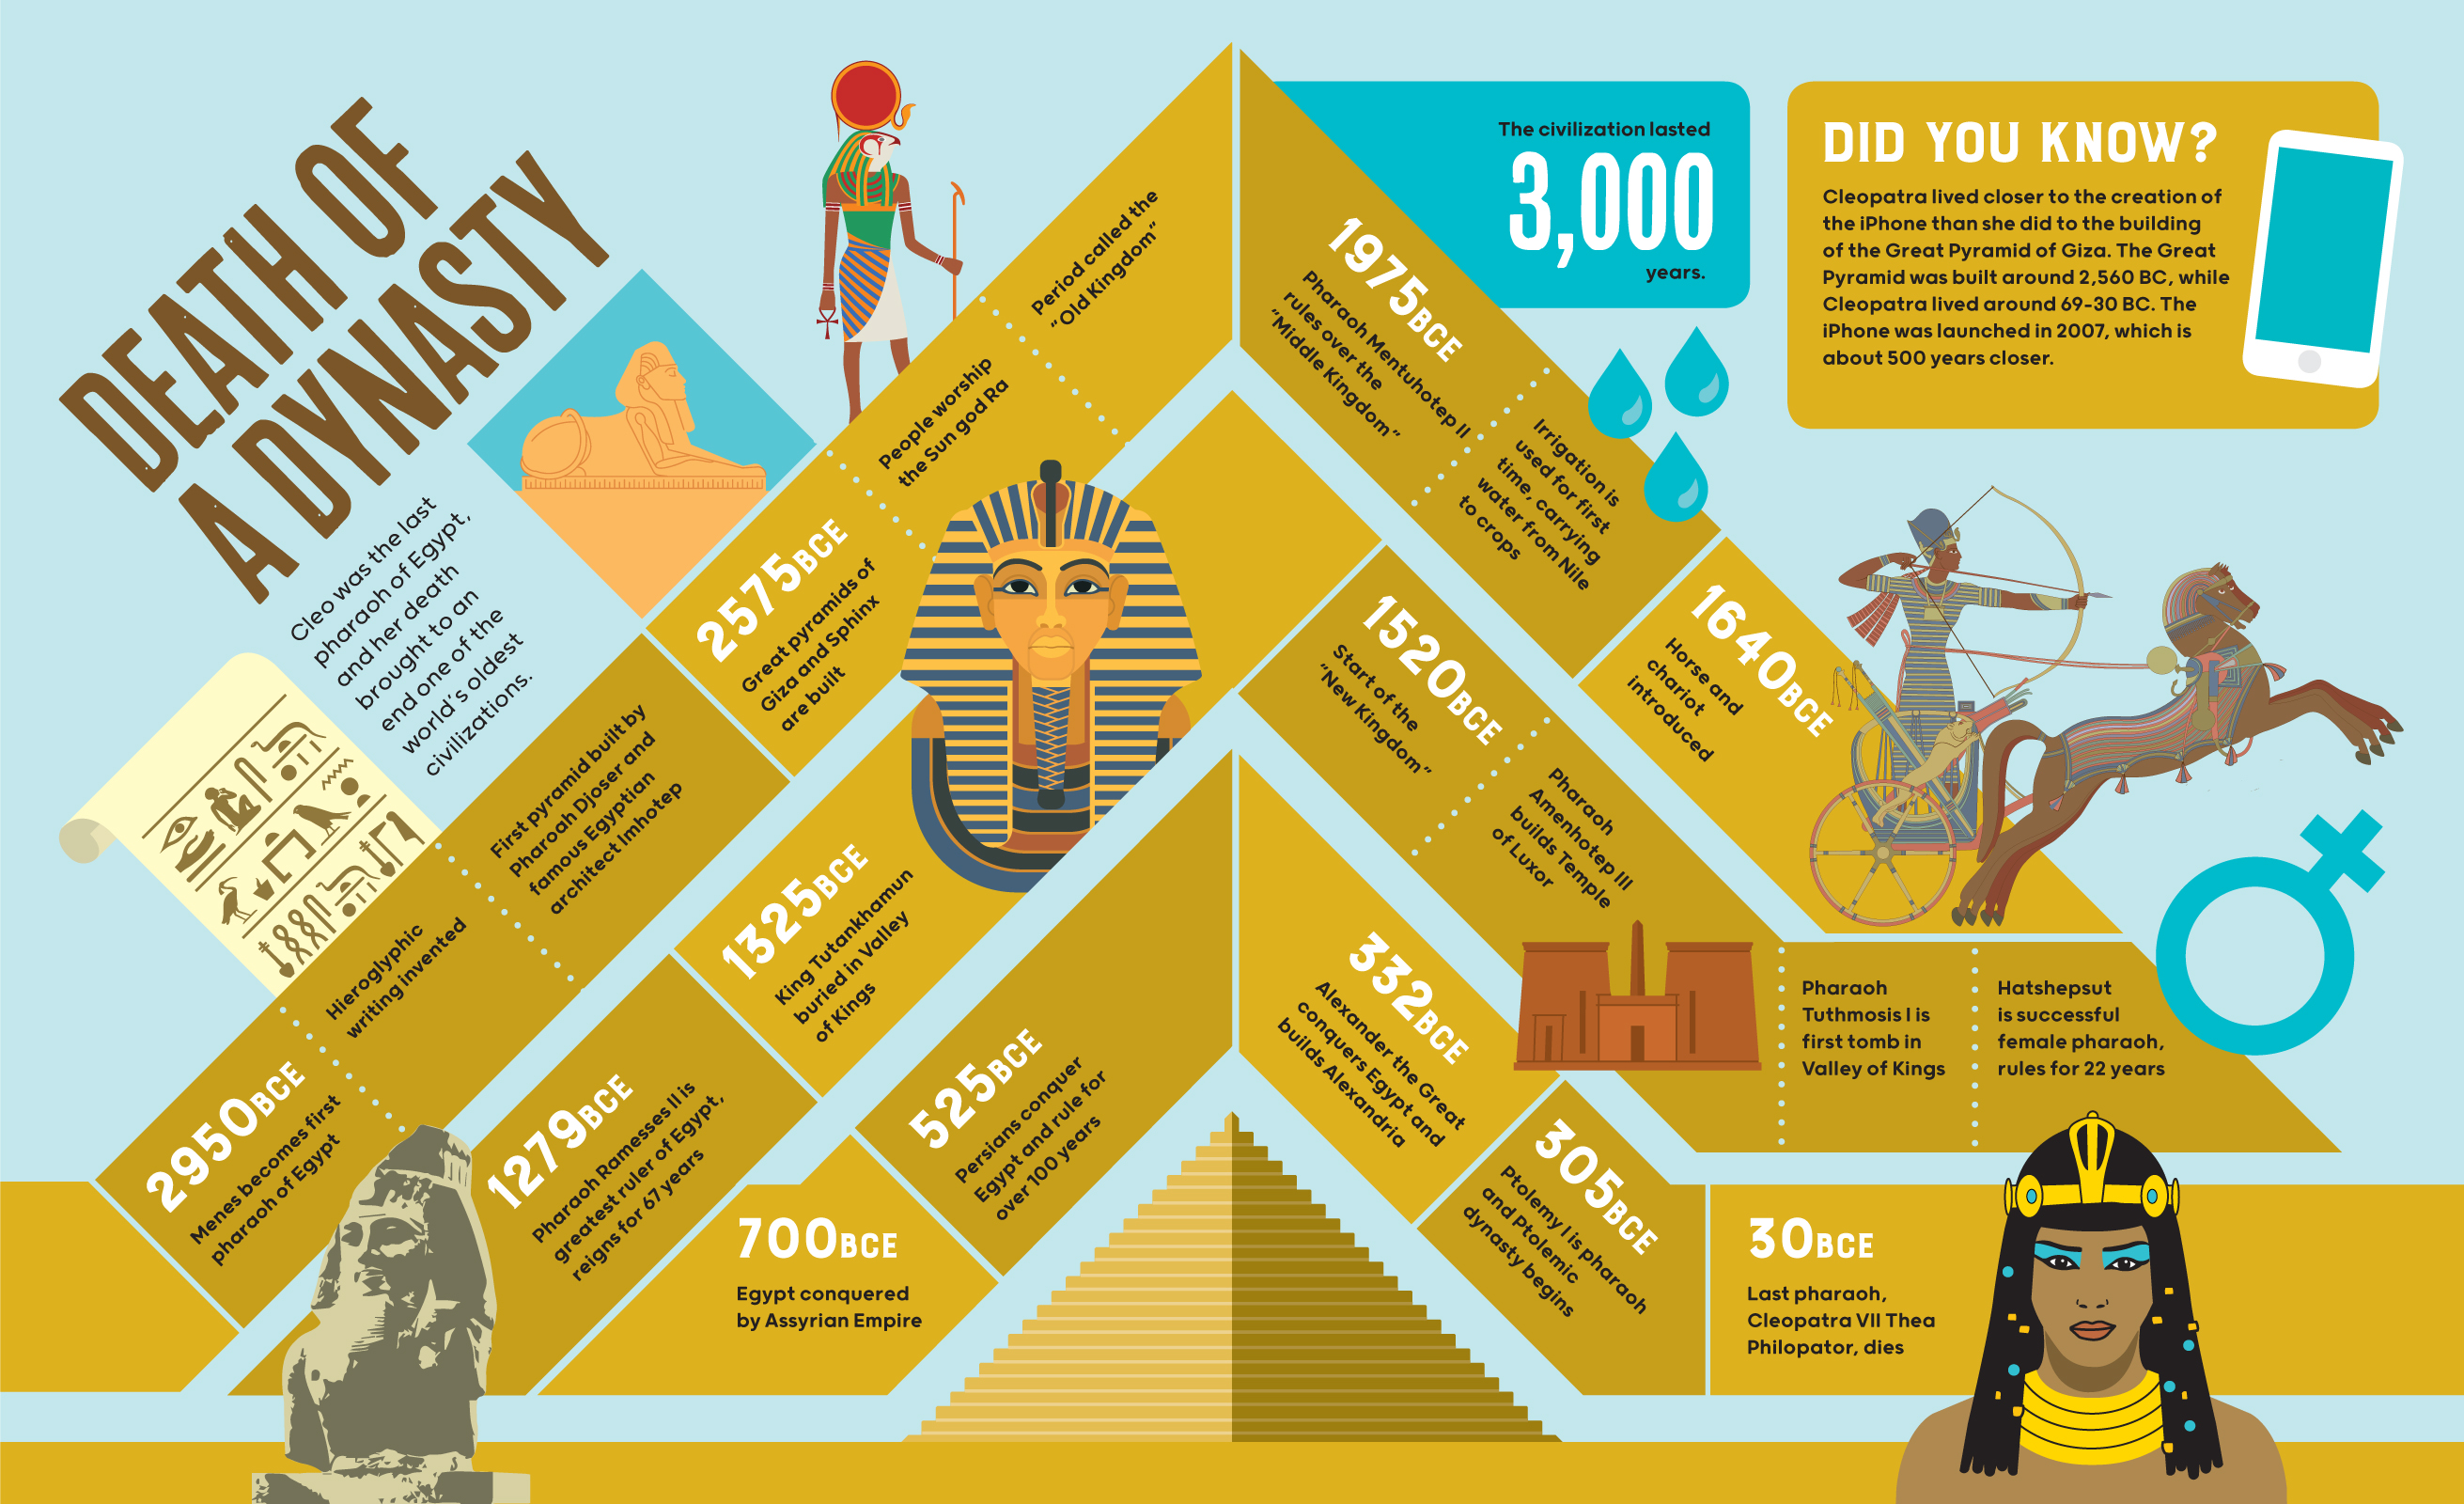 Great Lives in Graphics: Cleopatra